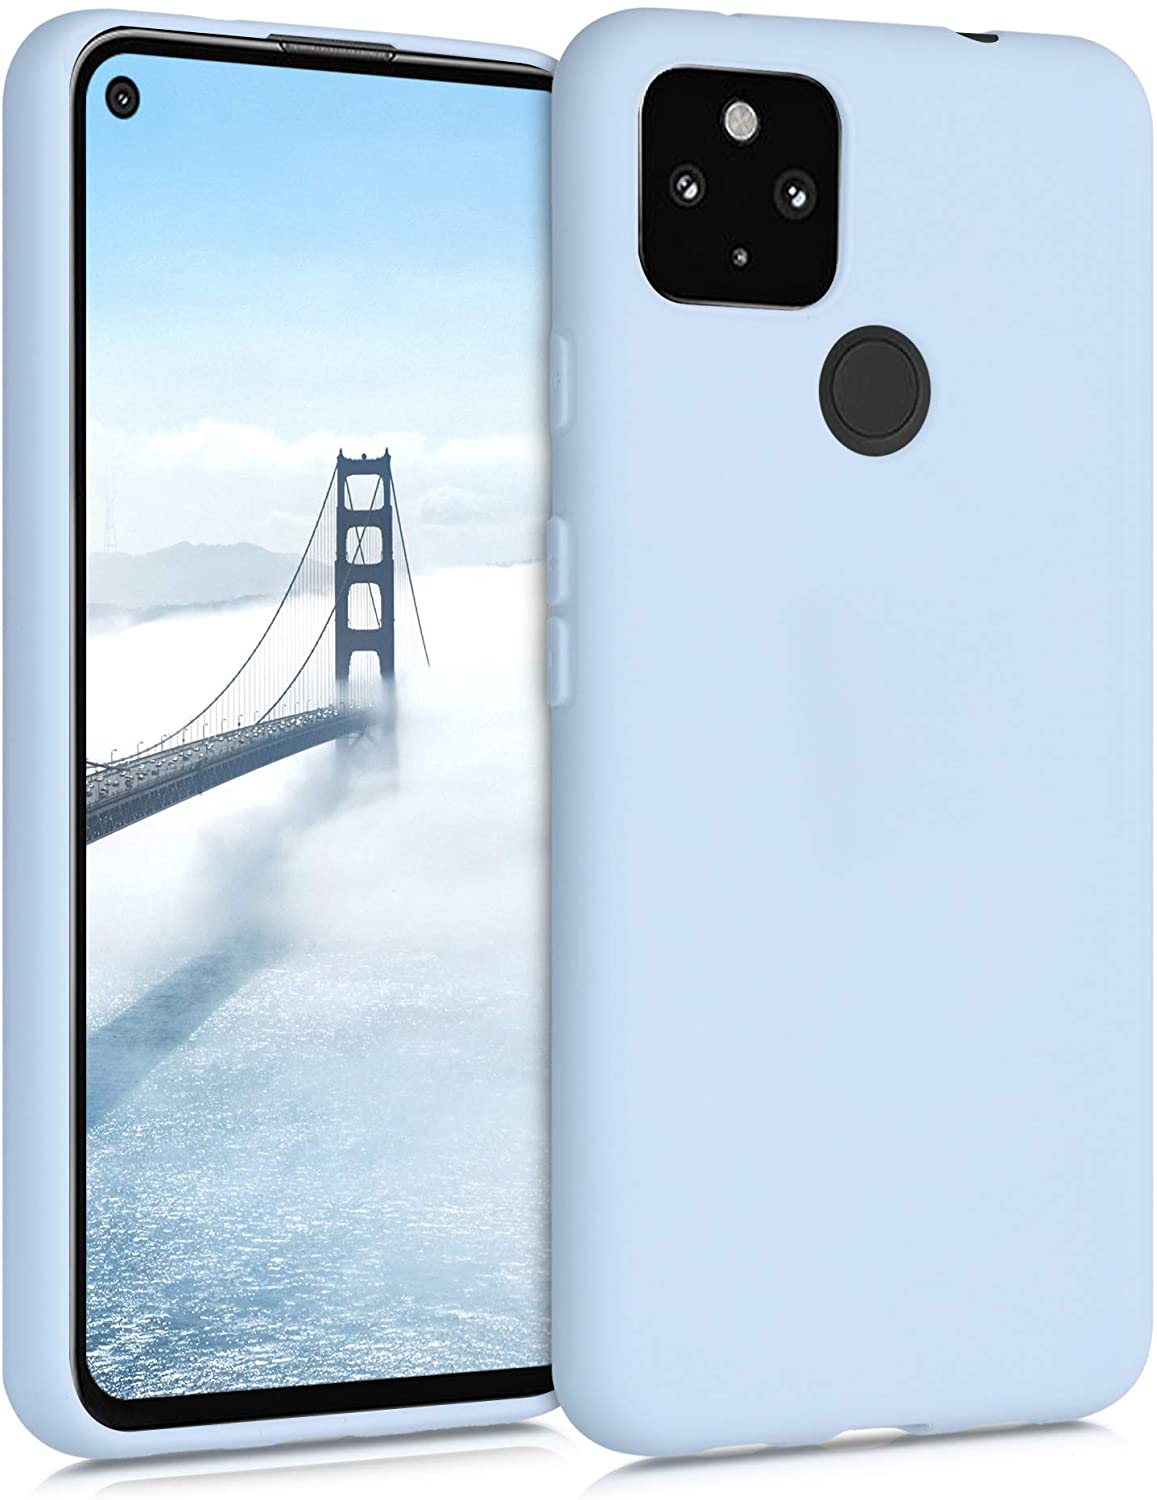 Kwmobile Tpu Silicone Pixel 4a 5g Case Light Blue